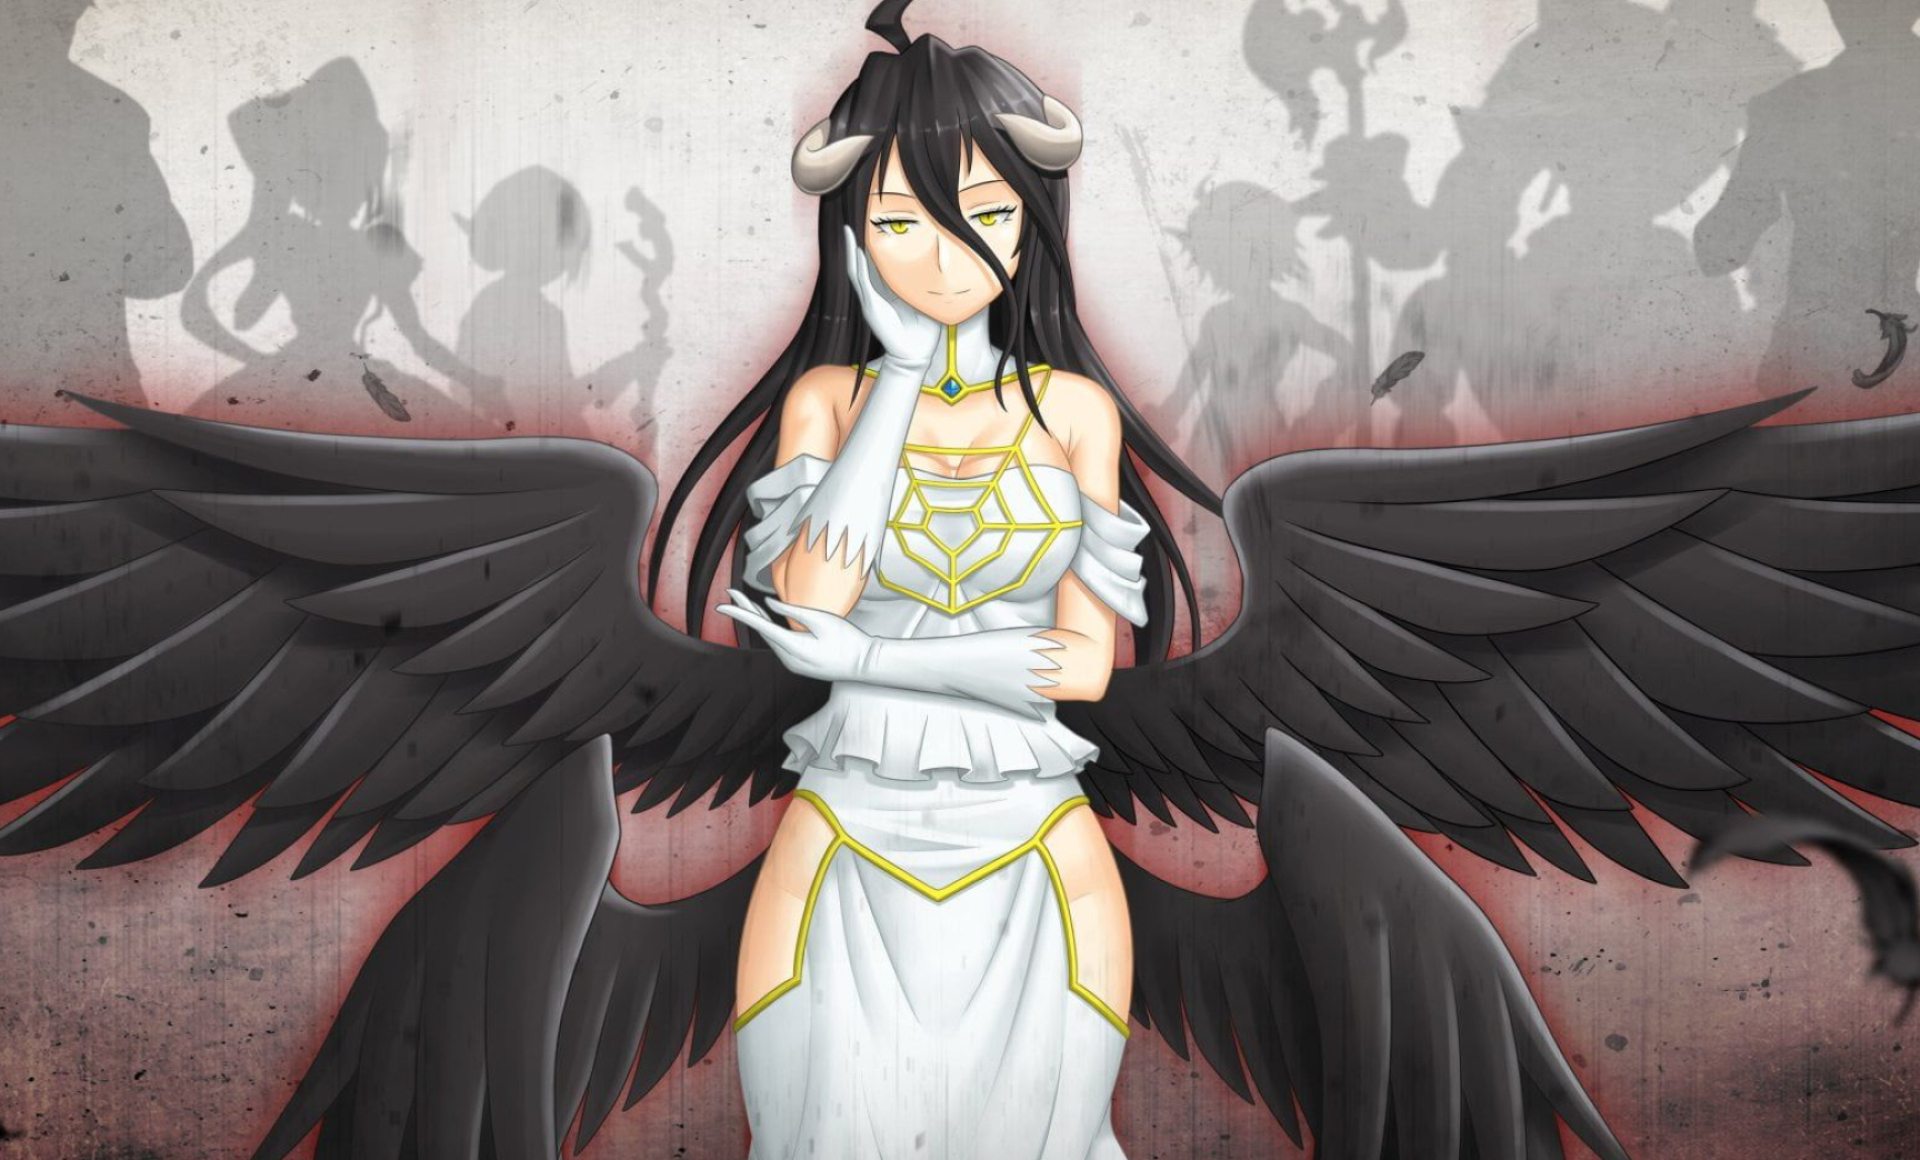 1920x1160 woman with wings digital wallpaper #Anime #Overlord Albedo (Overlord) Aura Bella Fiora Cocytus (Overlord) Demiurge (Overlord) &acirc;&#128;&brvbar; | Anime, Albedo, Character wallpaper